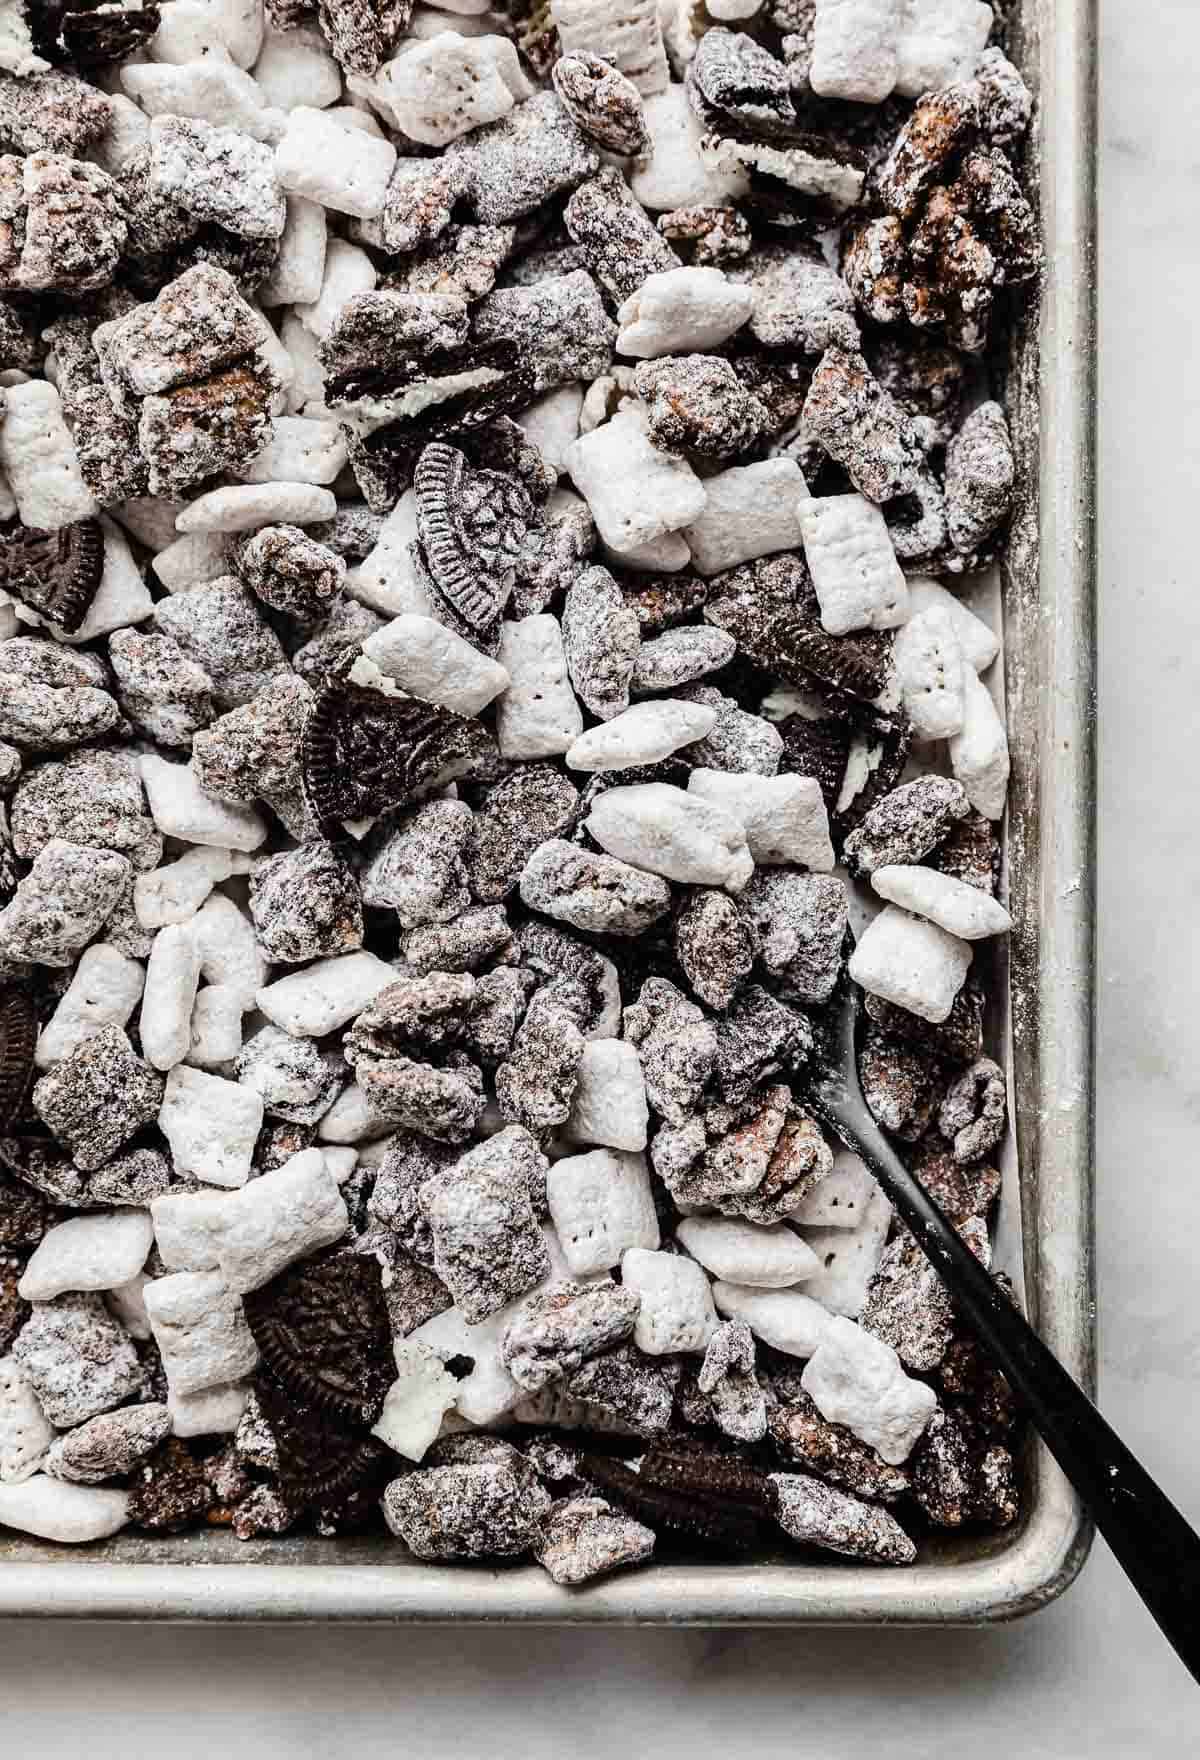 Oreo Muddy Buddies on a baking sheet with a black spoon scooping up some of the Oreo puppy chow.